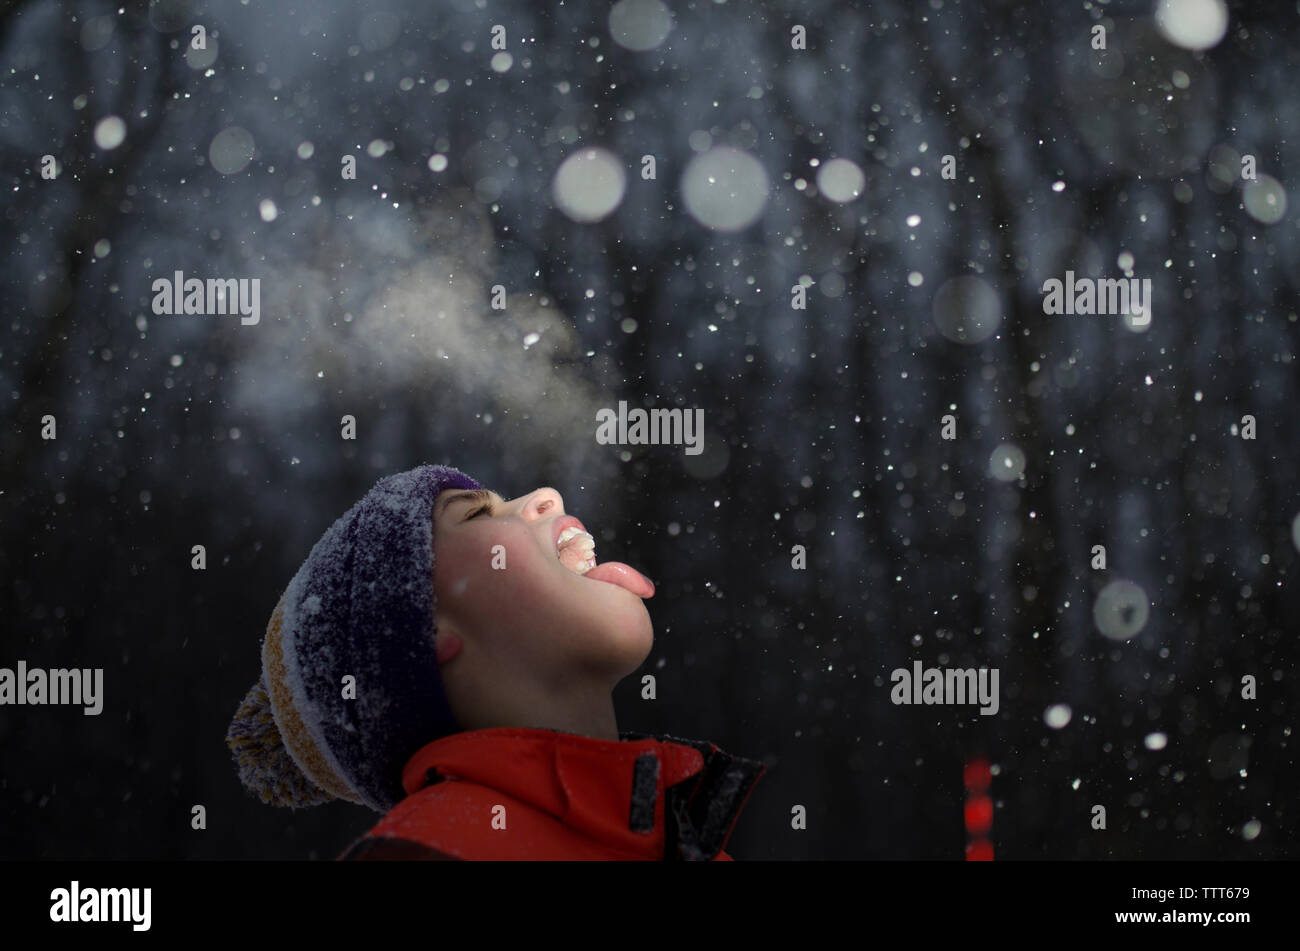 Boy with mouth open during snowing Stock Photo